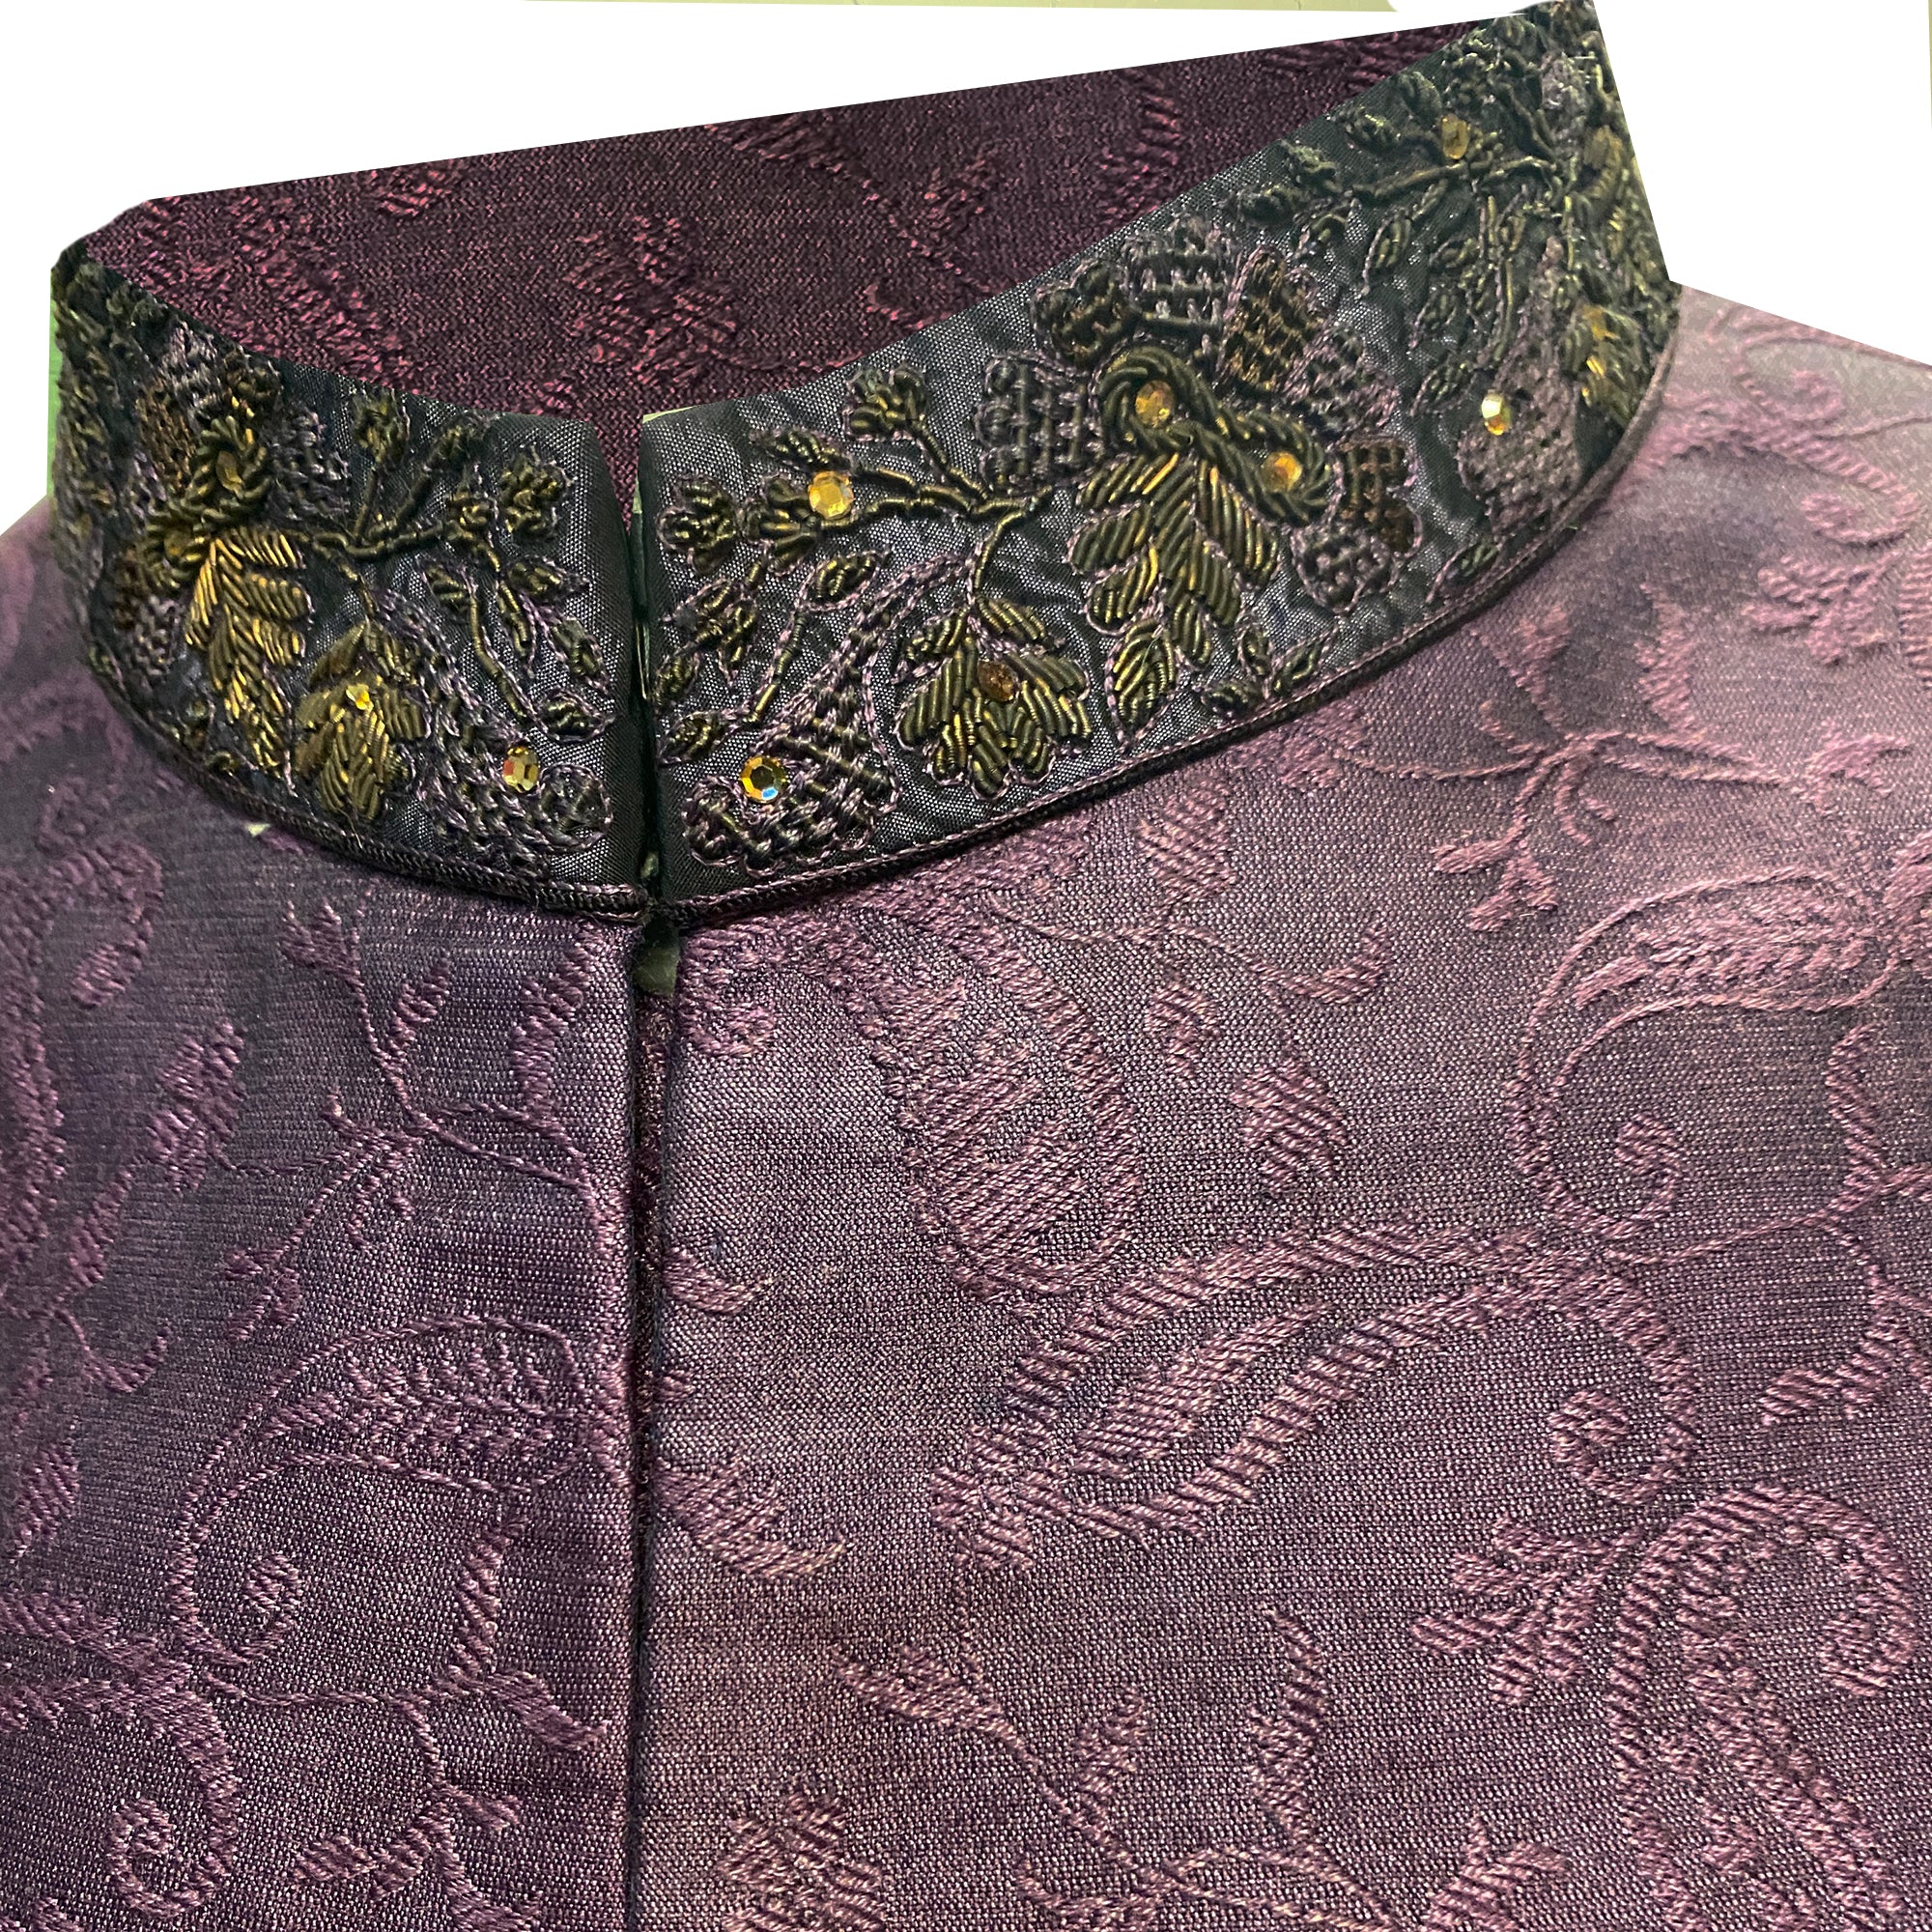 Purple Brocade Sherwani with Gold Embroidery - Vintage India NYC